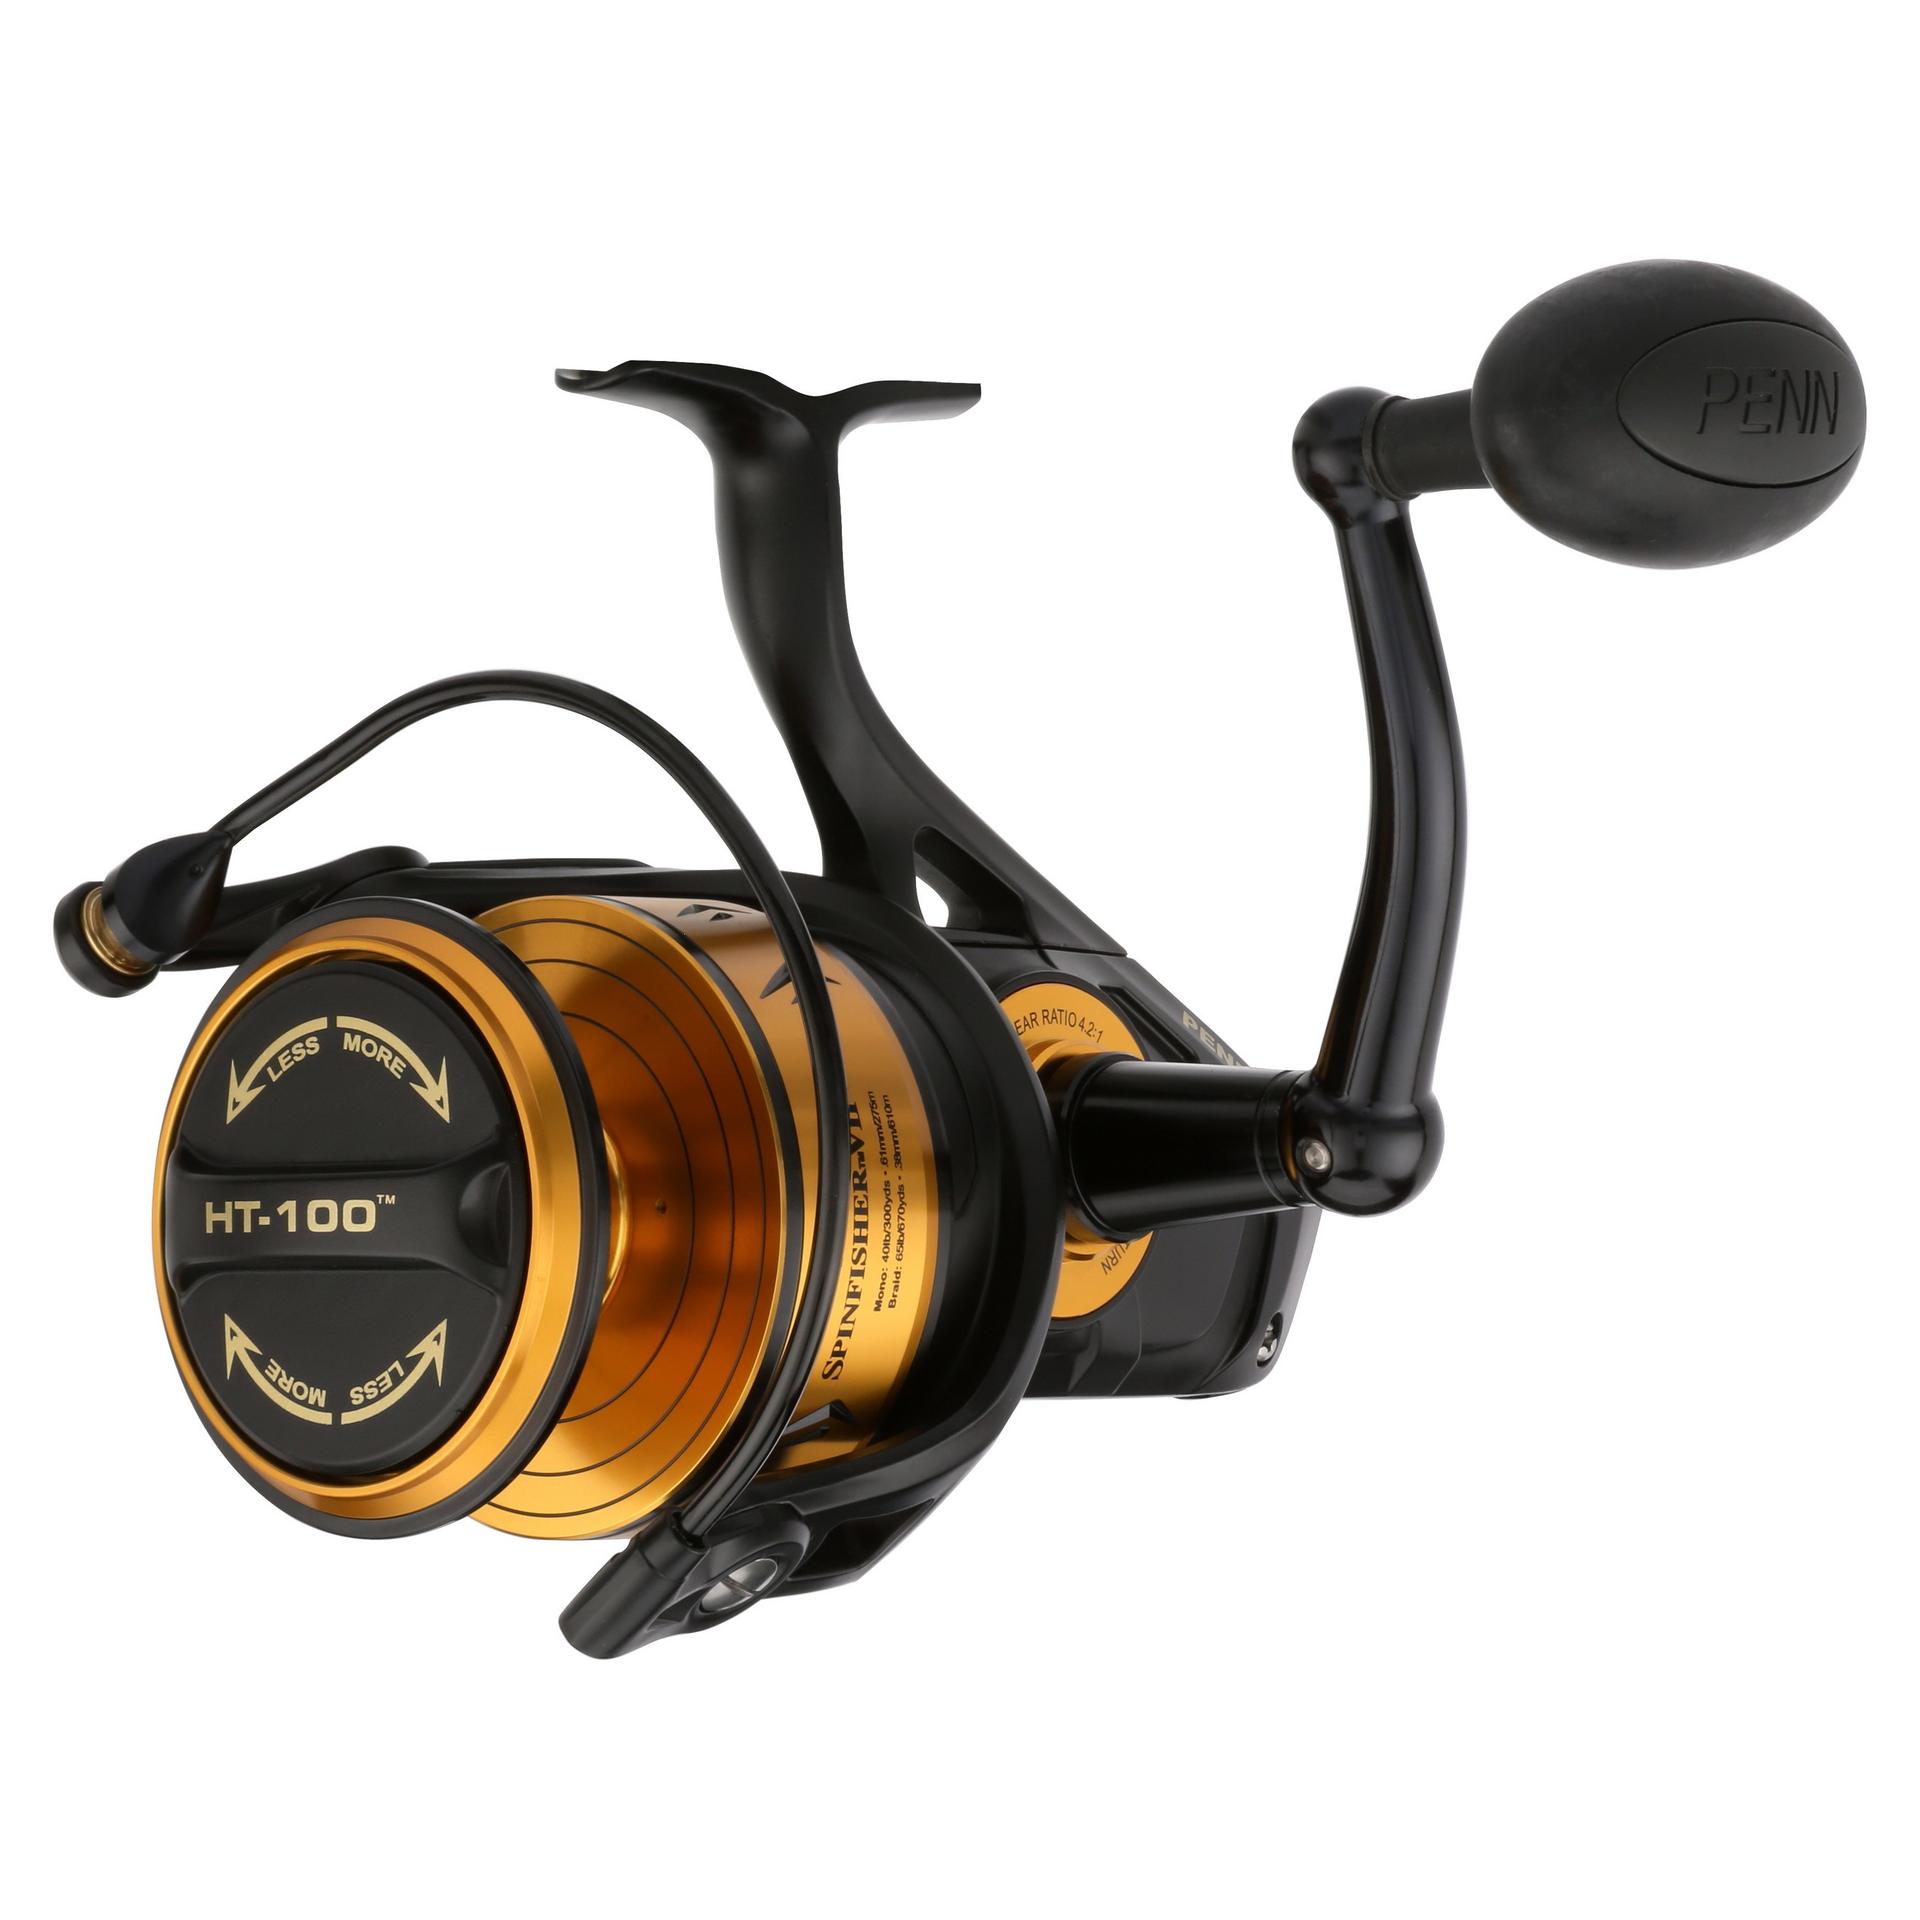 Carrete PENN Spinfisher VI de spinning - Stone Mountain Outdoors